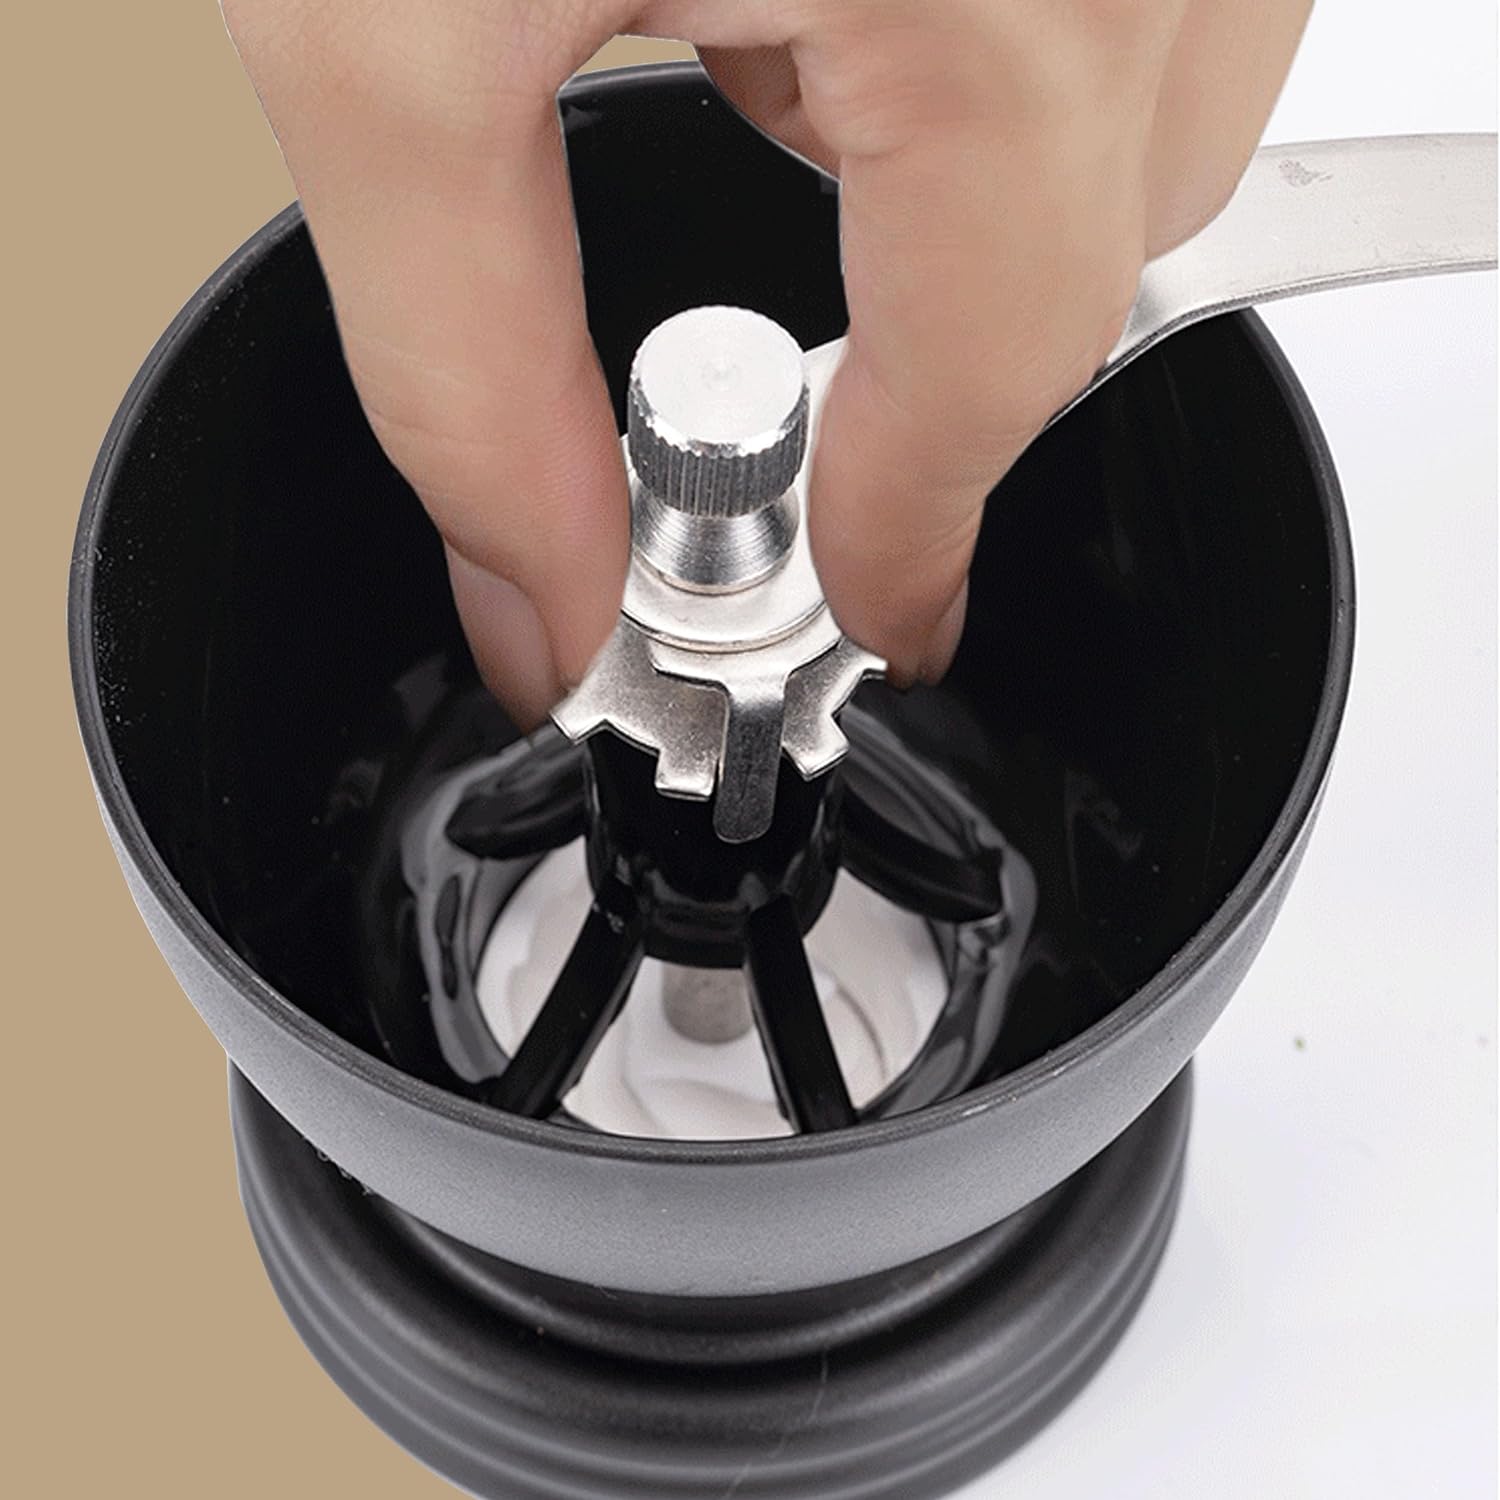 Manual Coffee Grinder Set with Conical Ceramic Burrs, Small Manual Coffee Grinder, Coarse and Fine Adjustable Manual Coffee Bean Grinder with Two Glass Jars, Brush and Spoon Spoon